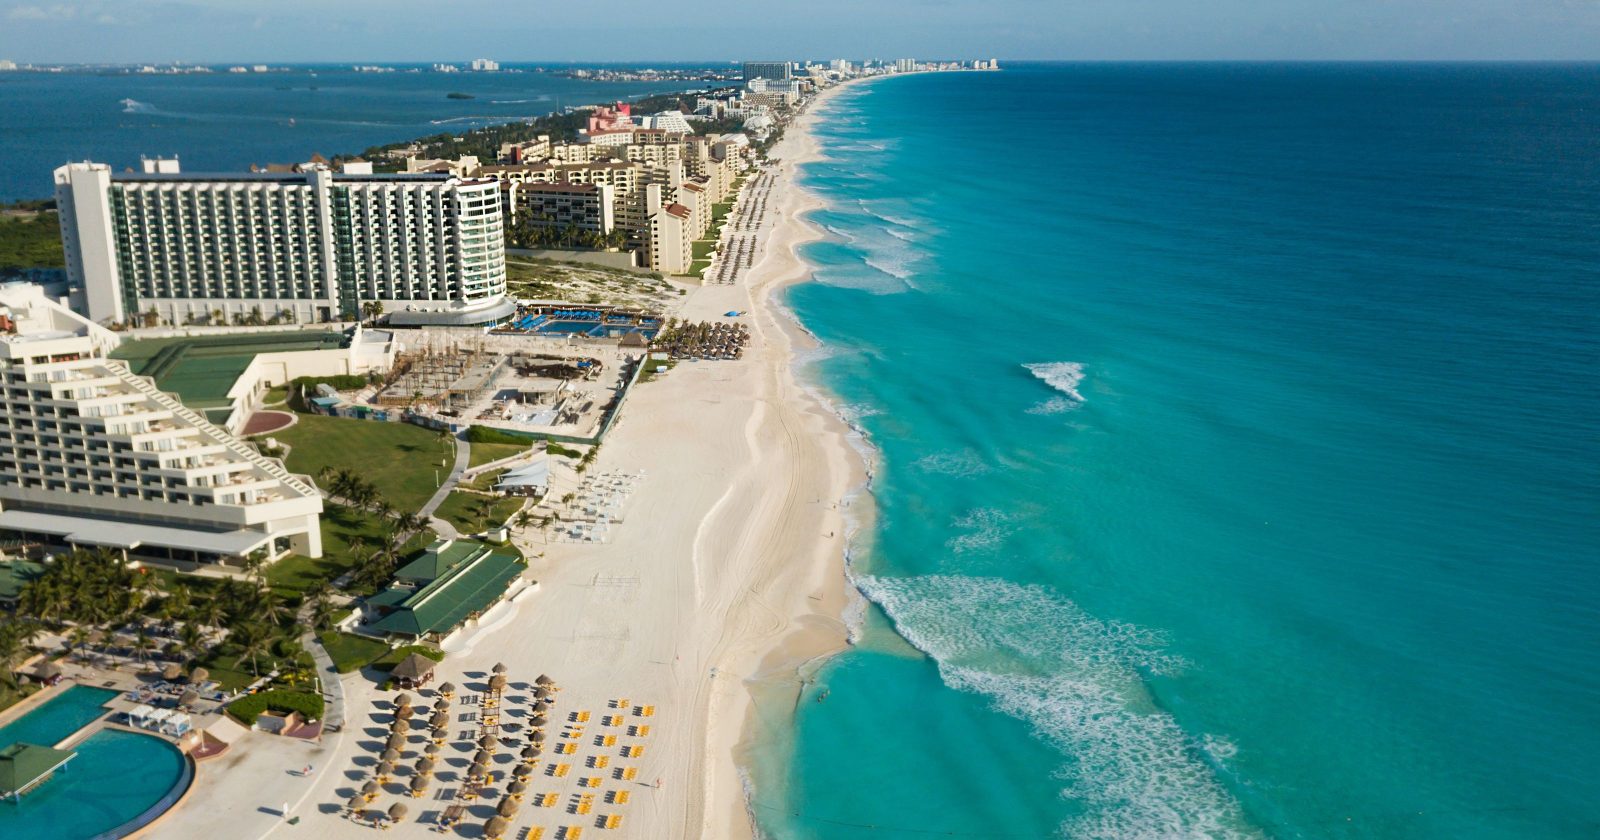 Only Actual Geniuses Have Scored Over 15/20 on This Trivia Test. Will You? cancun